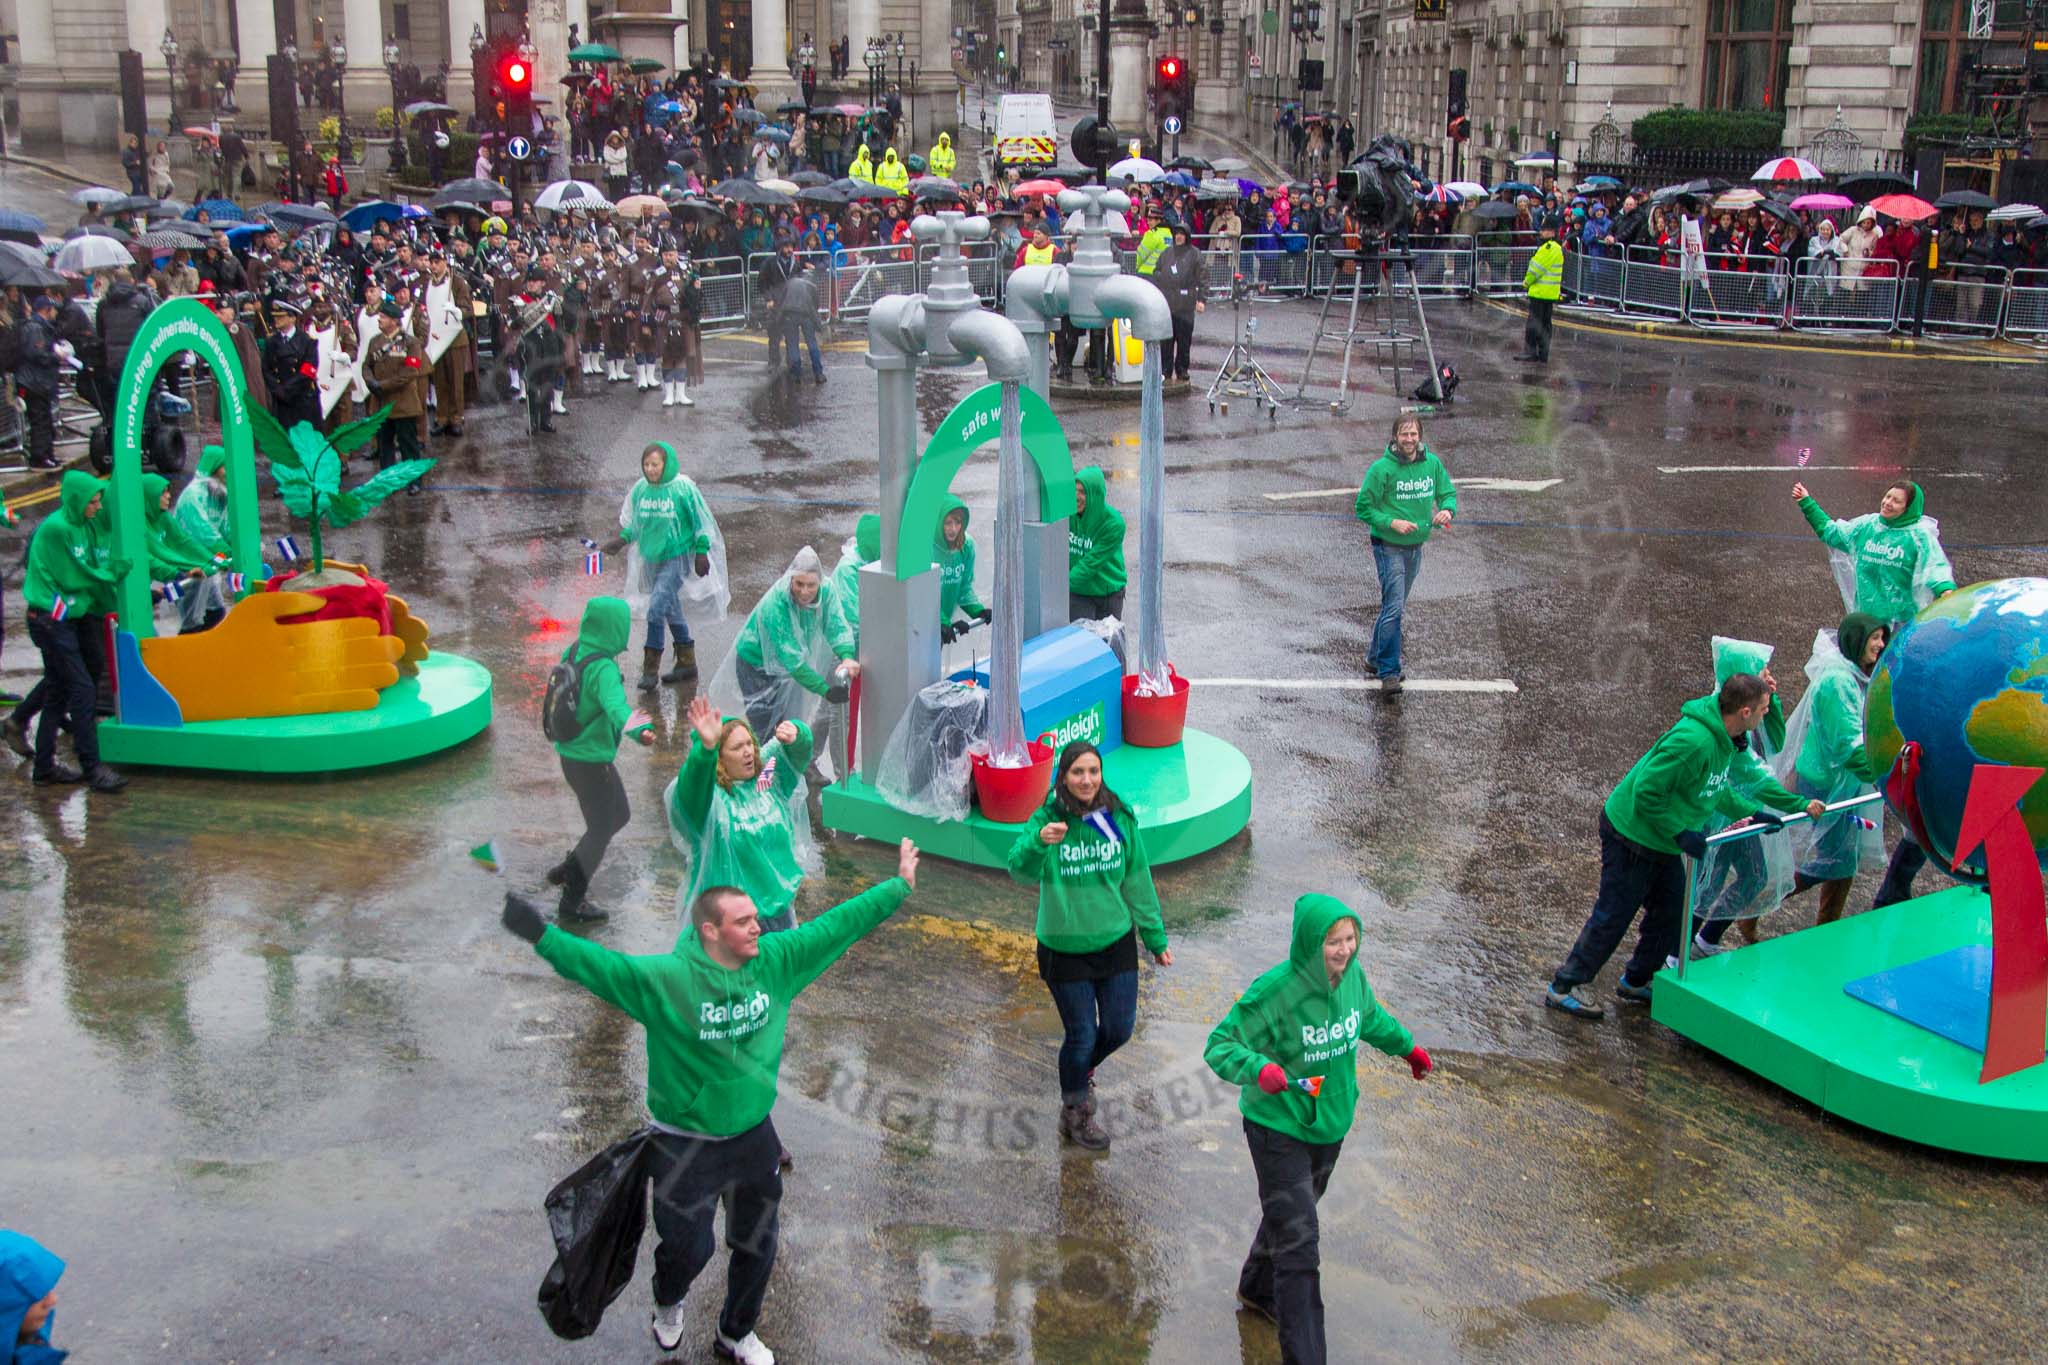 Lord Mayor's Show 2013: 21-Raleigh International-is a charity that challenges and empowers young people to deliver grassroots sustainable development. Its programmes focus on provading access to safe water and sanitation..
Press stand opposite Mansion House, City of London,
London,
Greater London,
United Kingdom,
on 09 November 2013 at 11:11, image #330